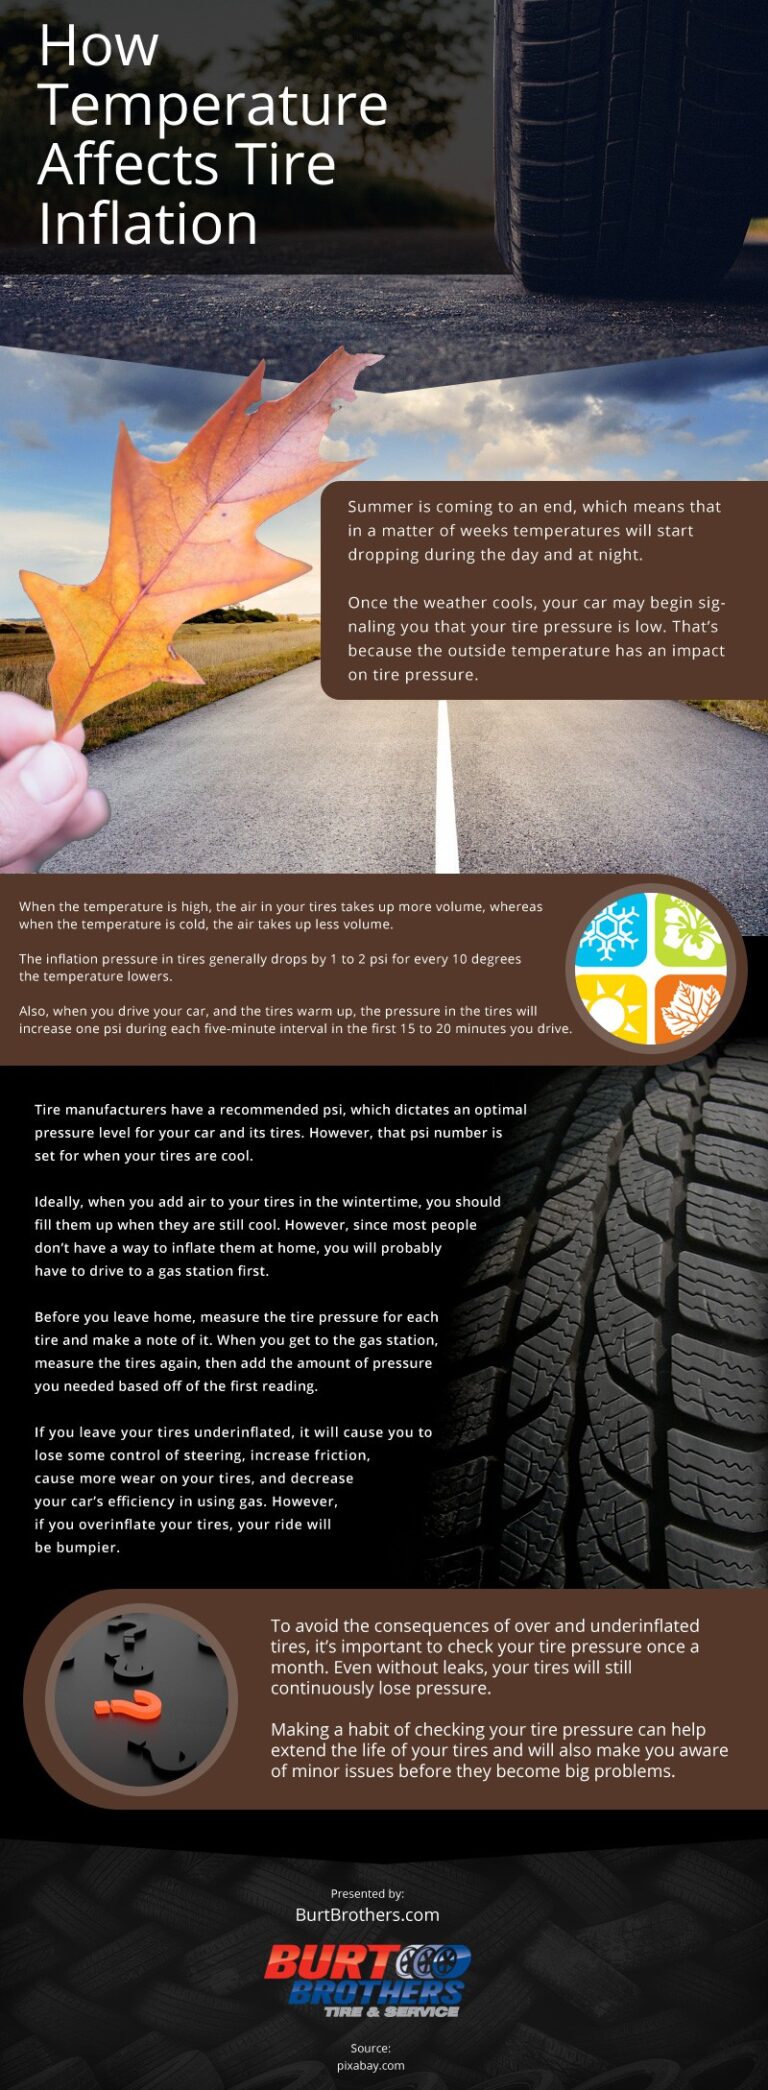 How Much Does Tire Pressure Increase When Driving